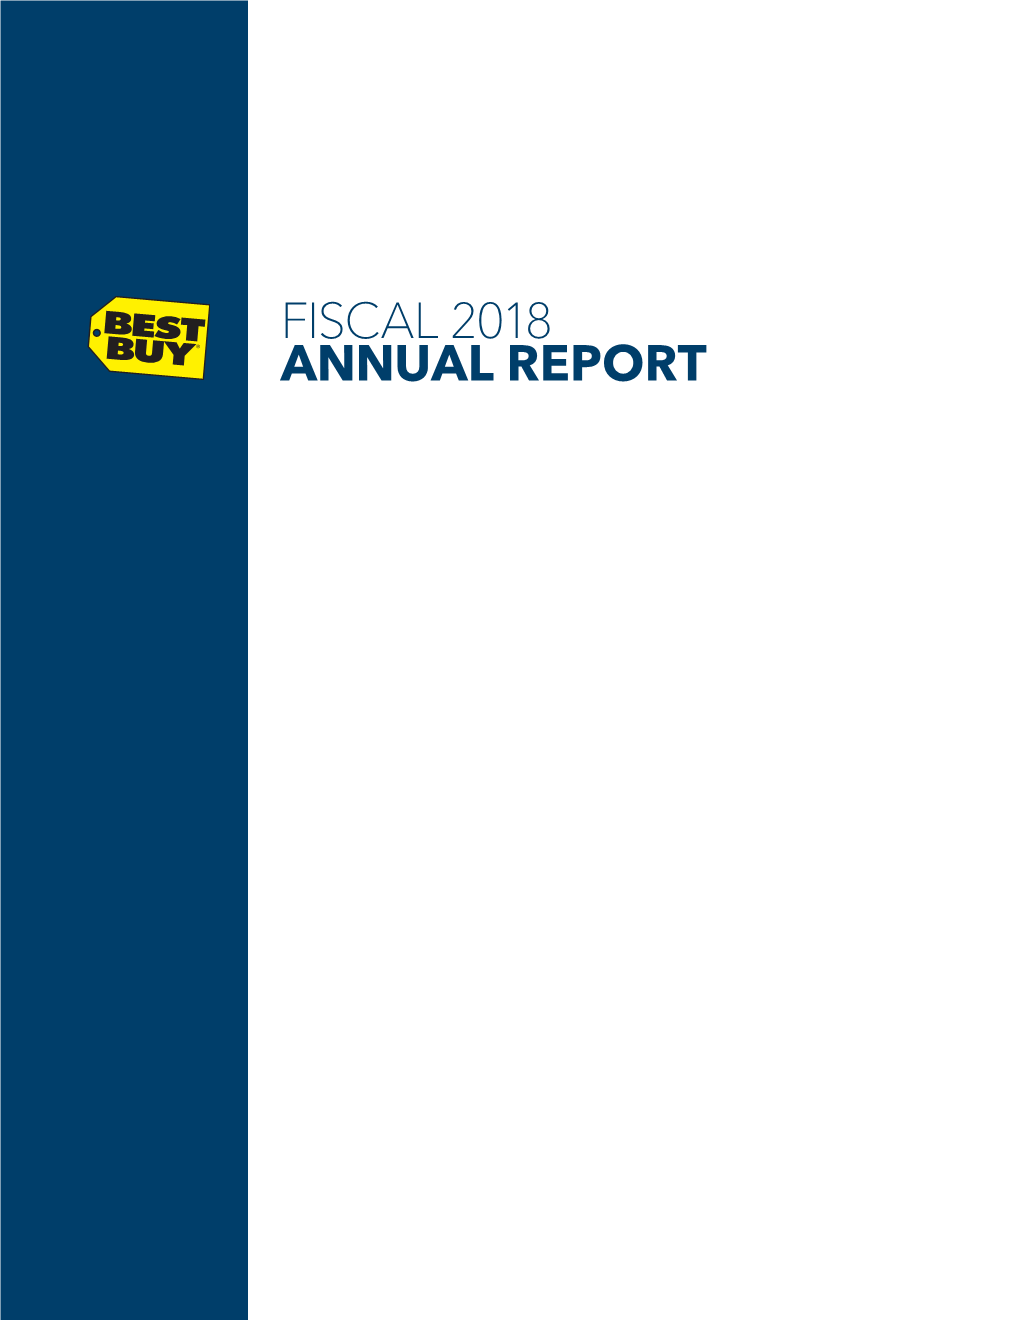 Fiscal 2018 Annual Report